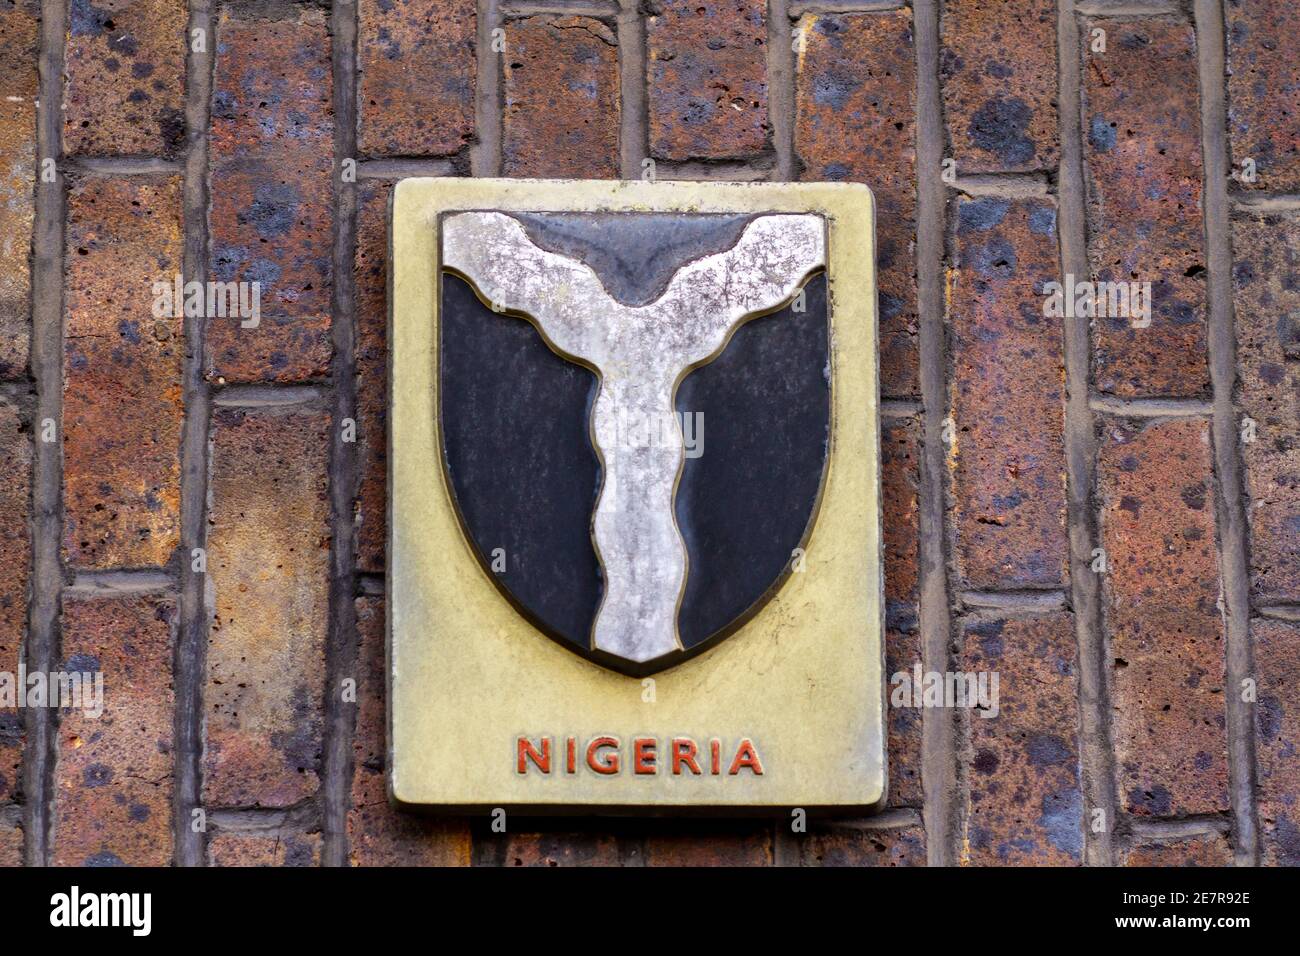 Sable a Pall wavy argent - a short description for Nigeria#s striking shield in their coat of arms Stock Photo